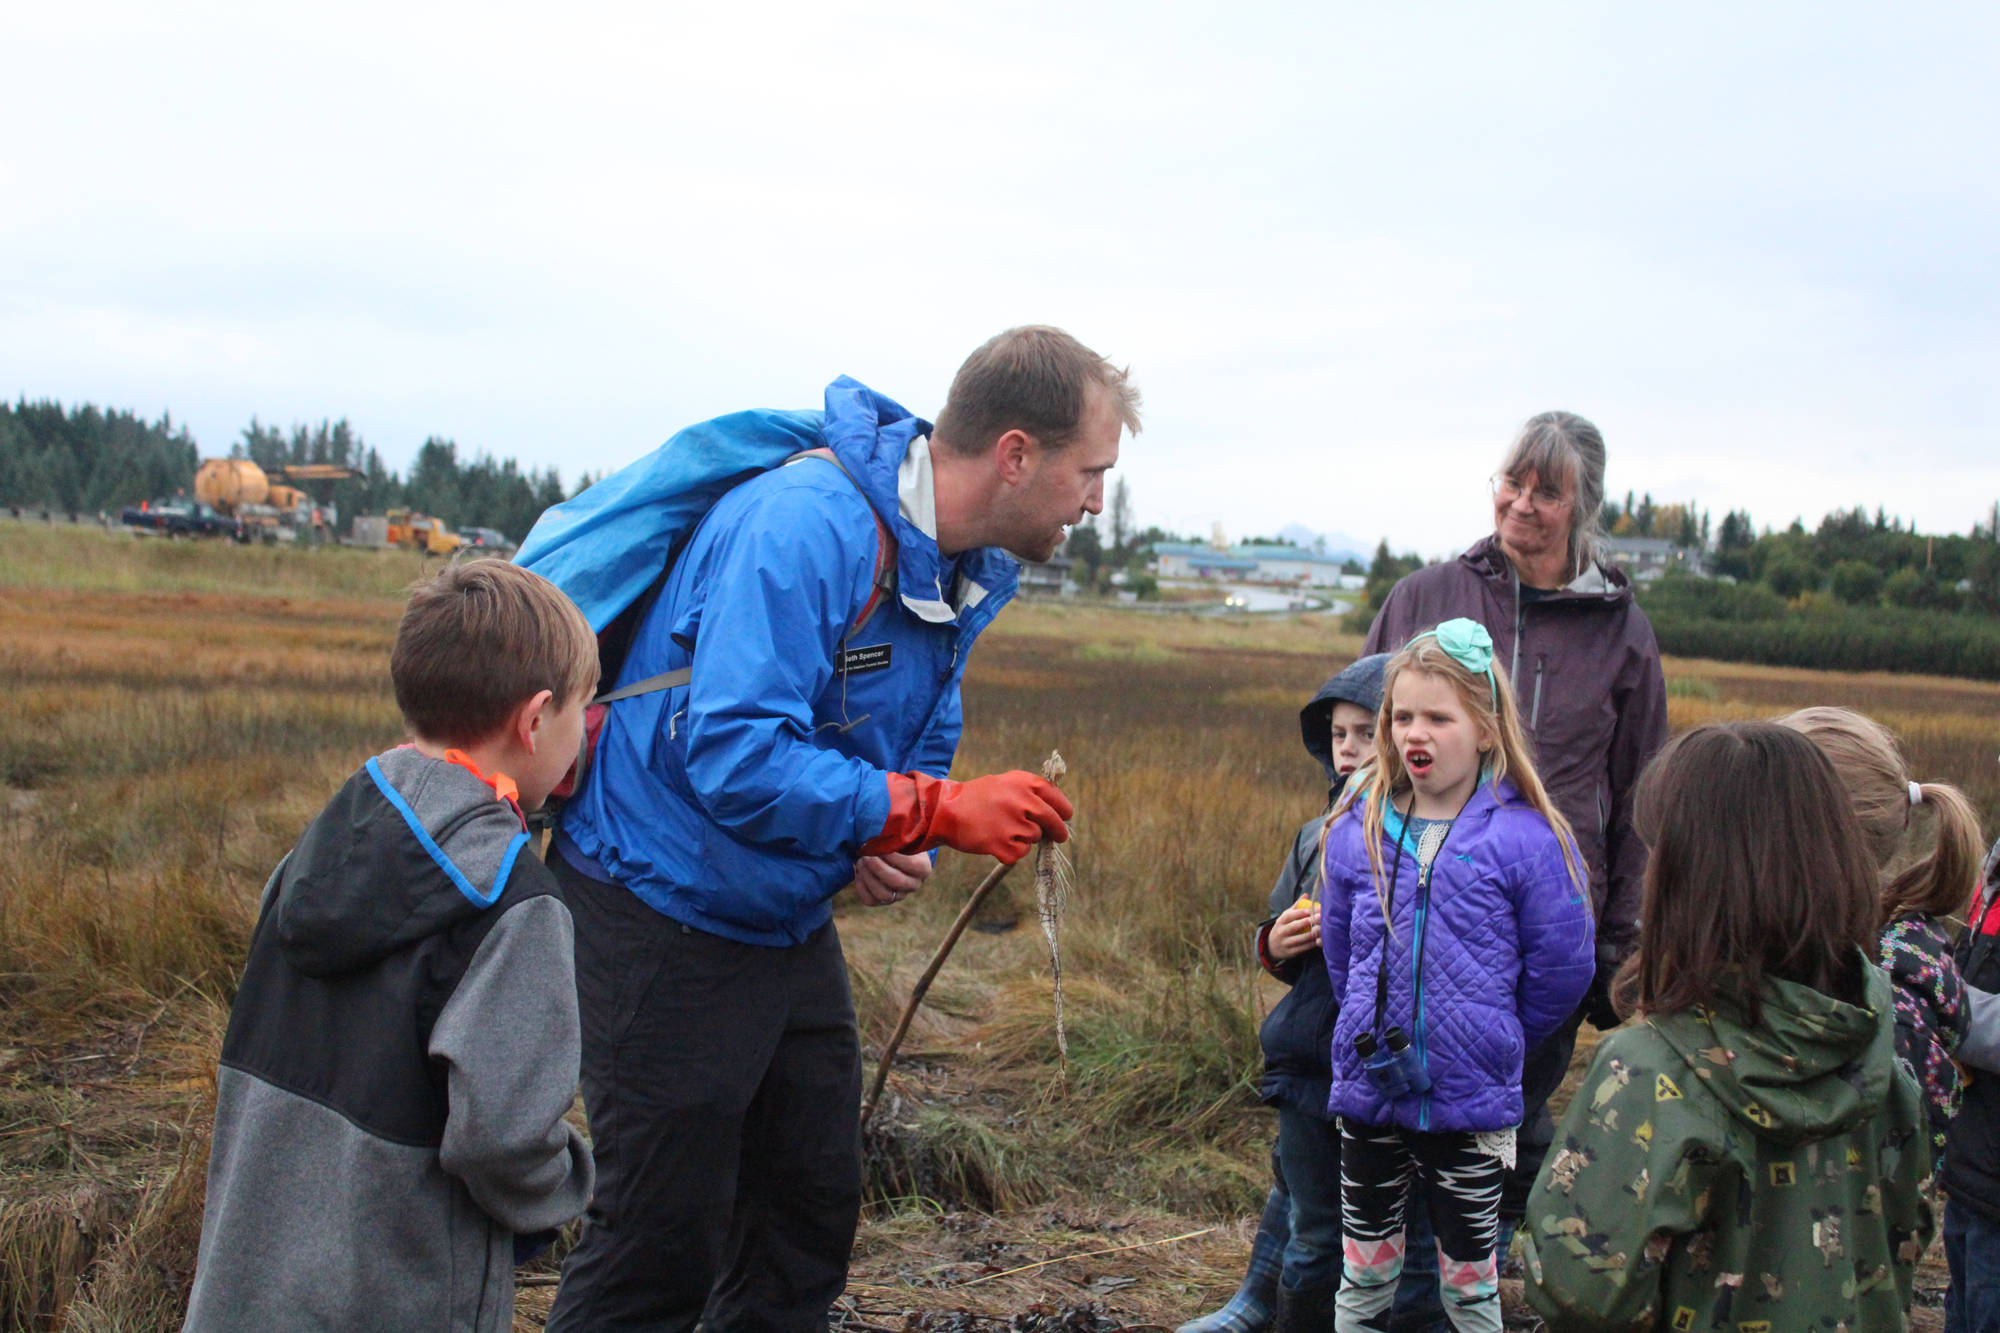 Seth Spencer from the Center for Alaskan Coastal Studies teaches Trygg Flyum (left), Tristan Alward (background), Tatum Kirtley (center) and their classmates about decomposing fish and what they mean for the Beluga Slough during a field trip there Thursday, Sept. 28, 2017 in Homer, Alaska. (Photo by Megan Pacer/Homer News)